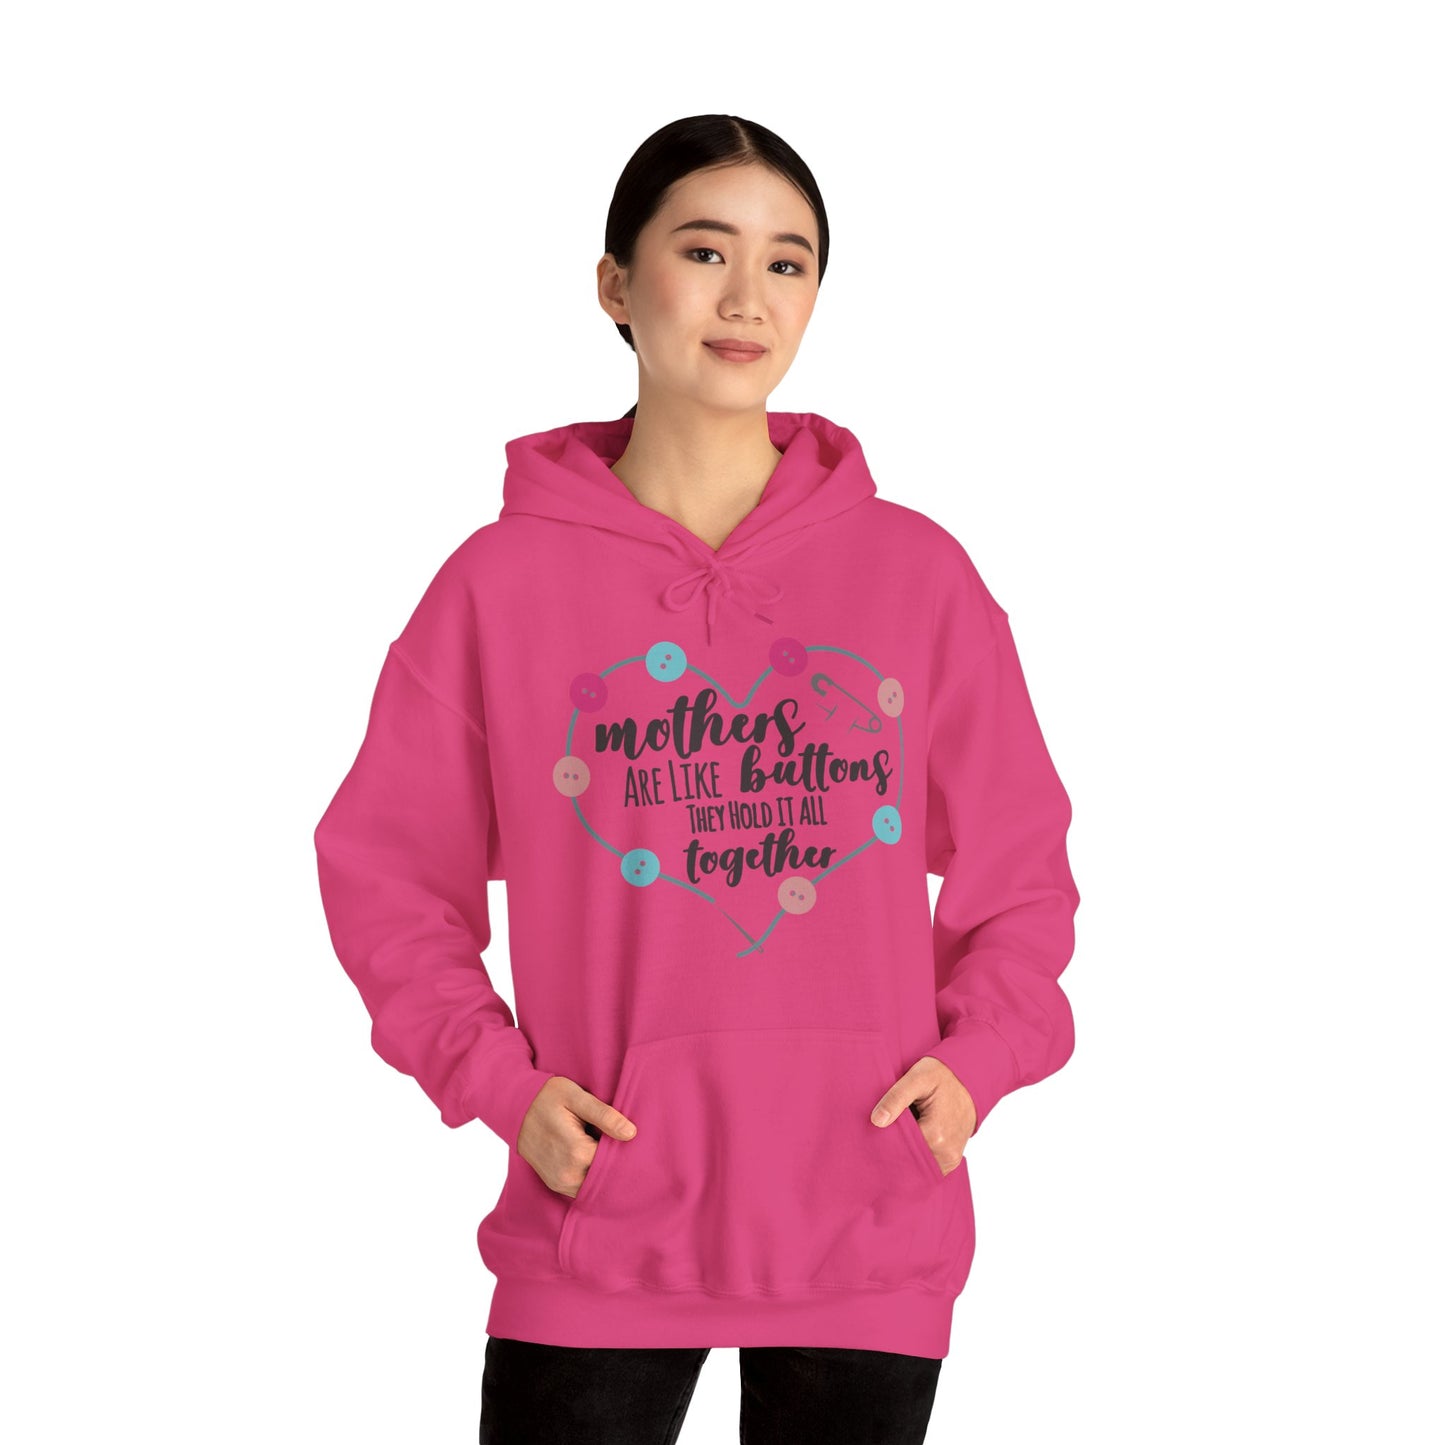 Mothers are like buttons - Unisex Heavy Blend™ Hooded Sweatshirt